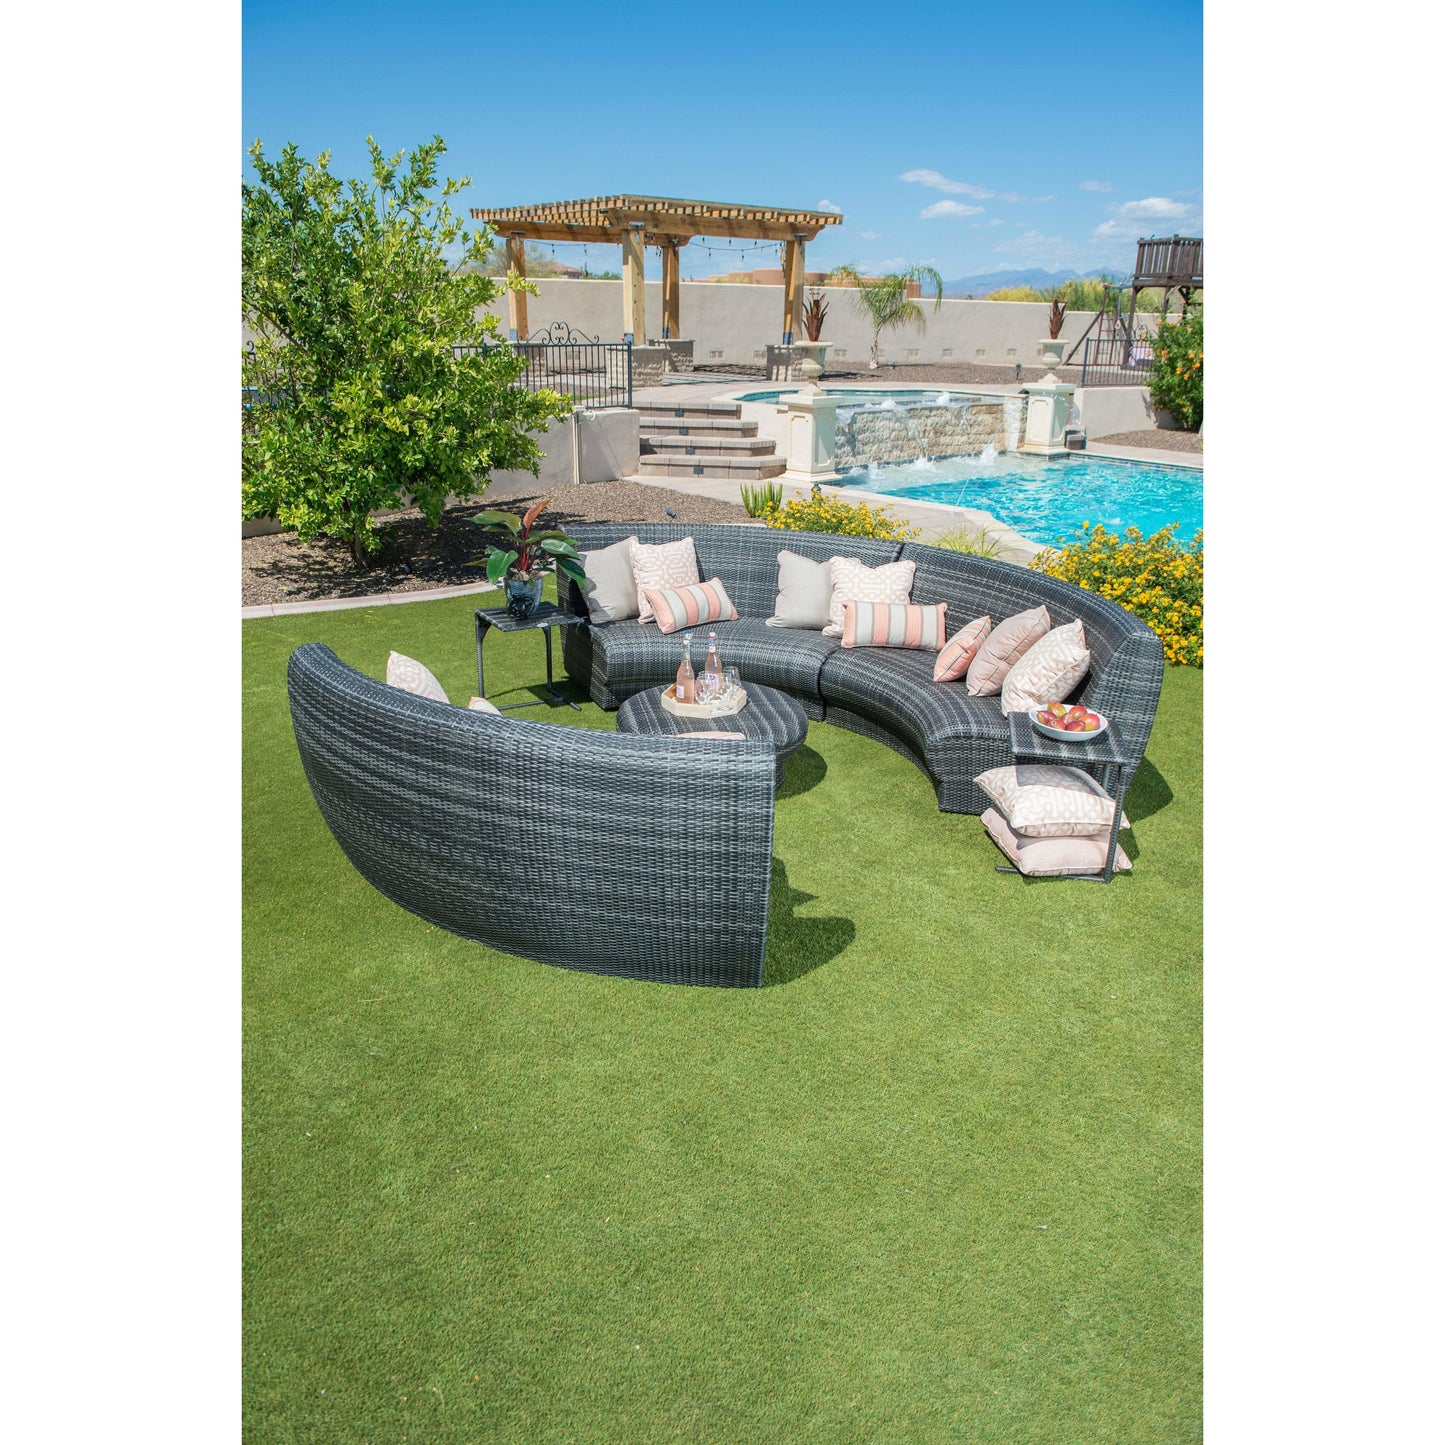 Genie Curved Armless Sofa S504031 Woodard Outdoor Patio | Canaveral Collection Seating Woodard 